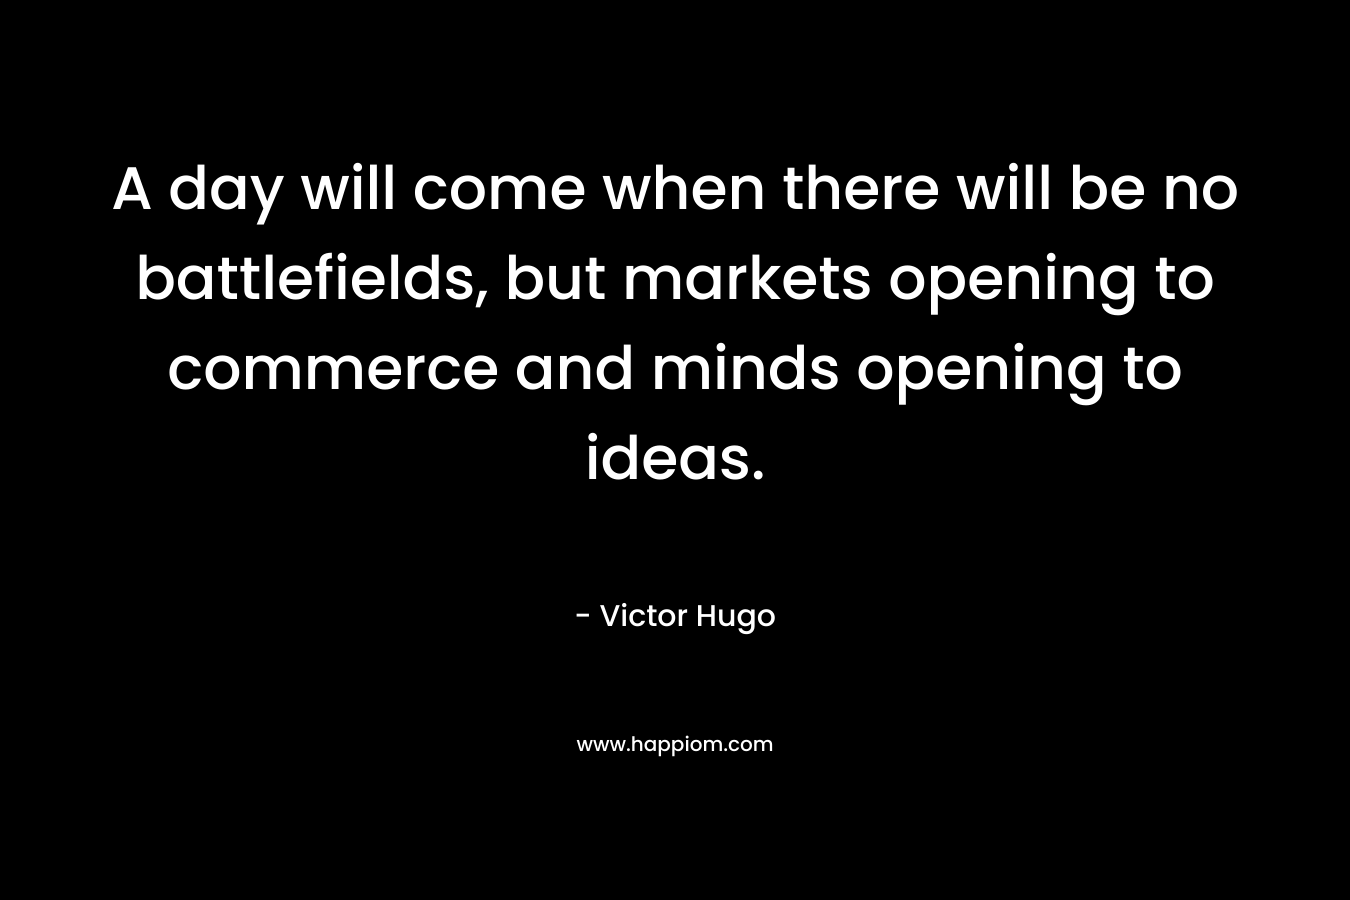 A day will come when there will be no battlefields, but markets opening to commerce and minds opening to ideas. – Victor Hugo